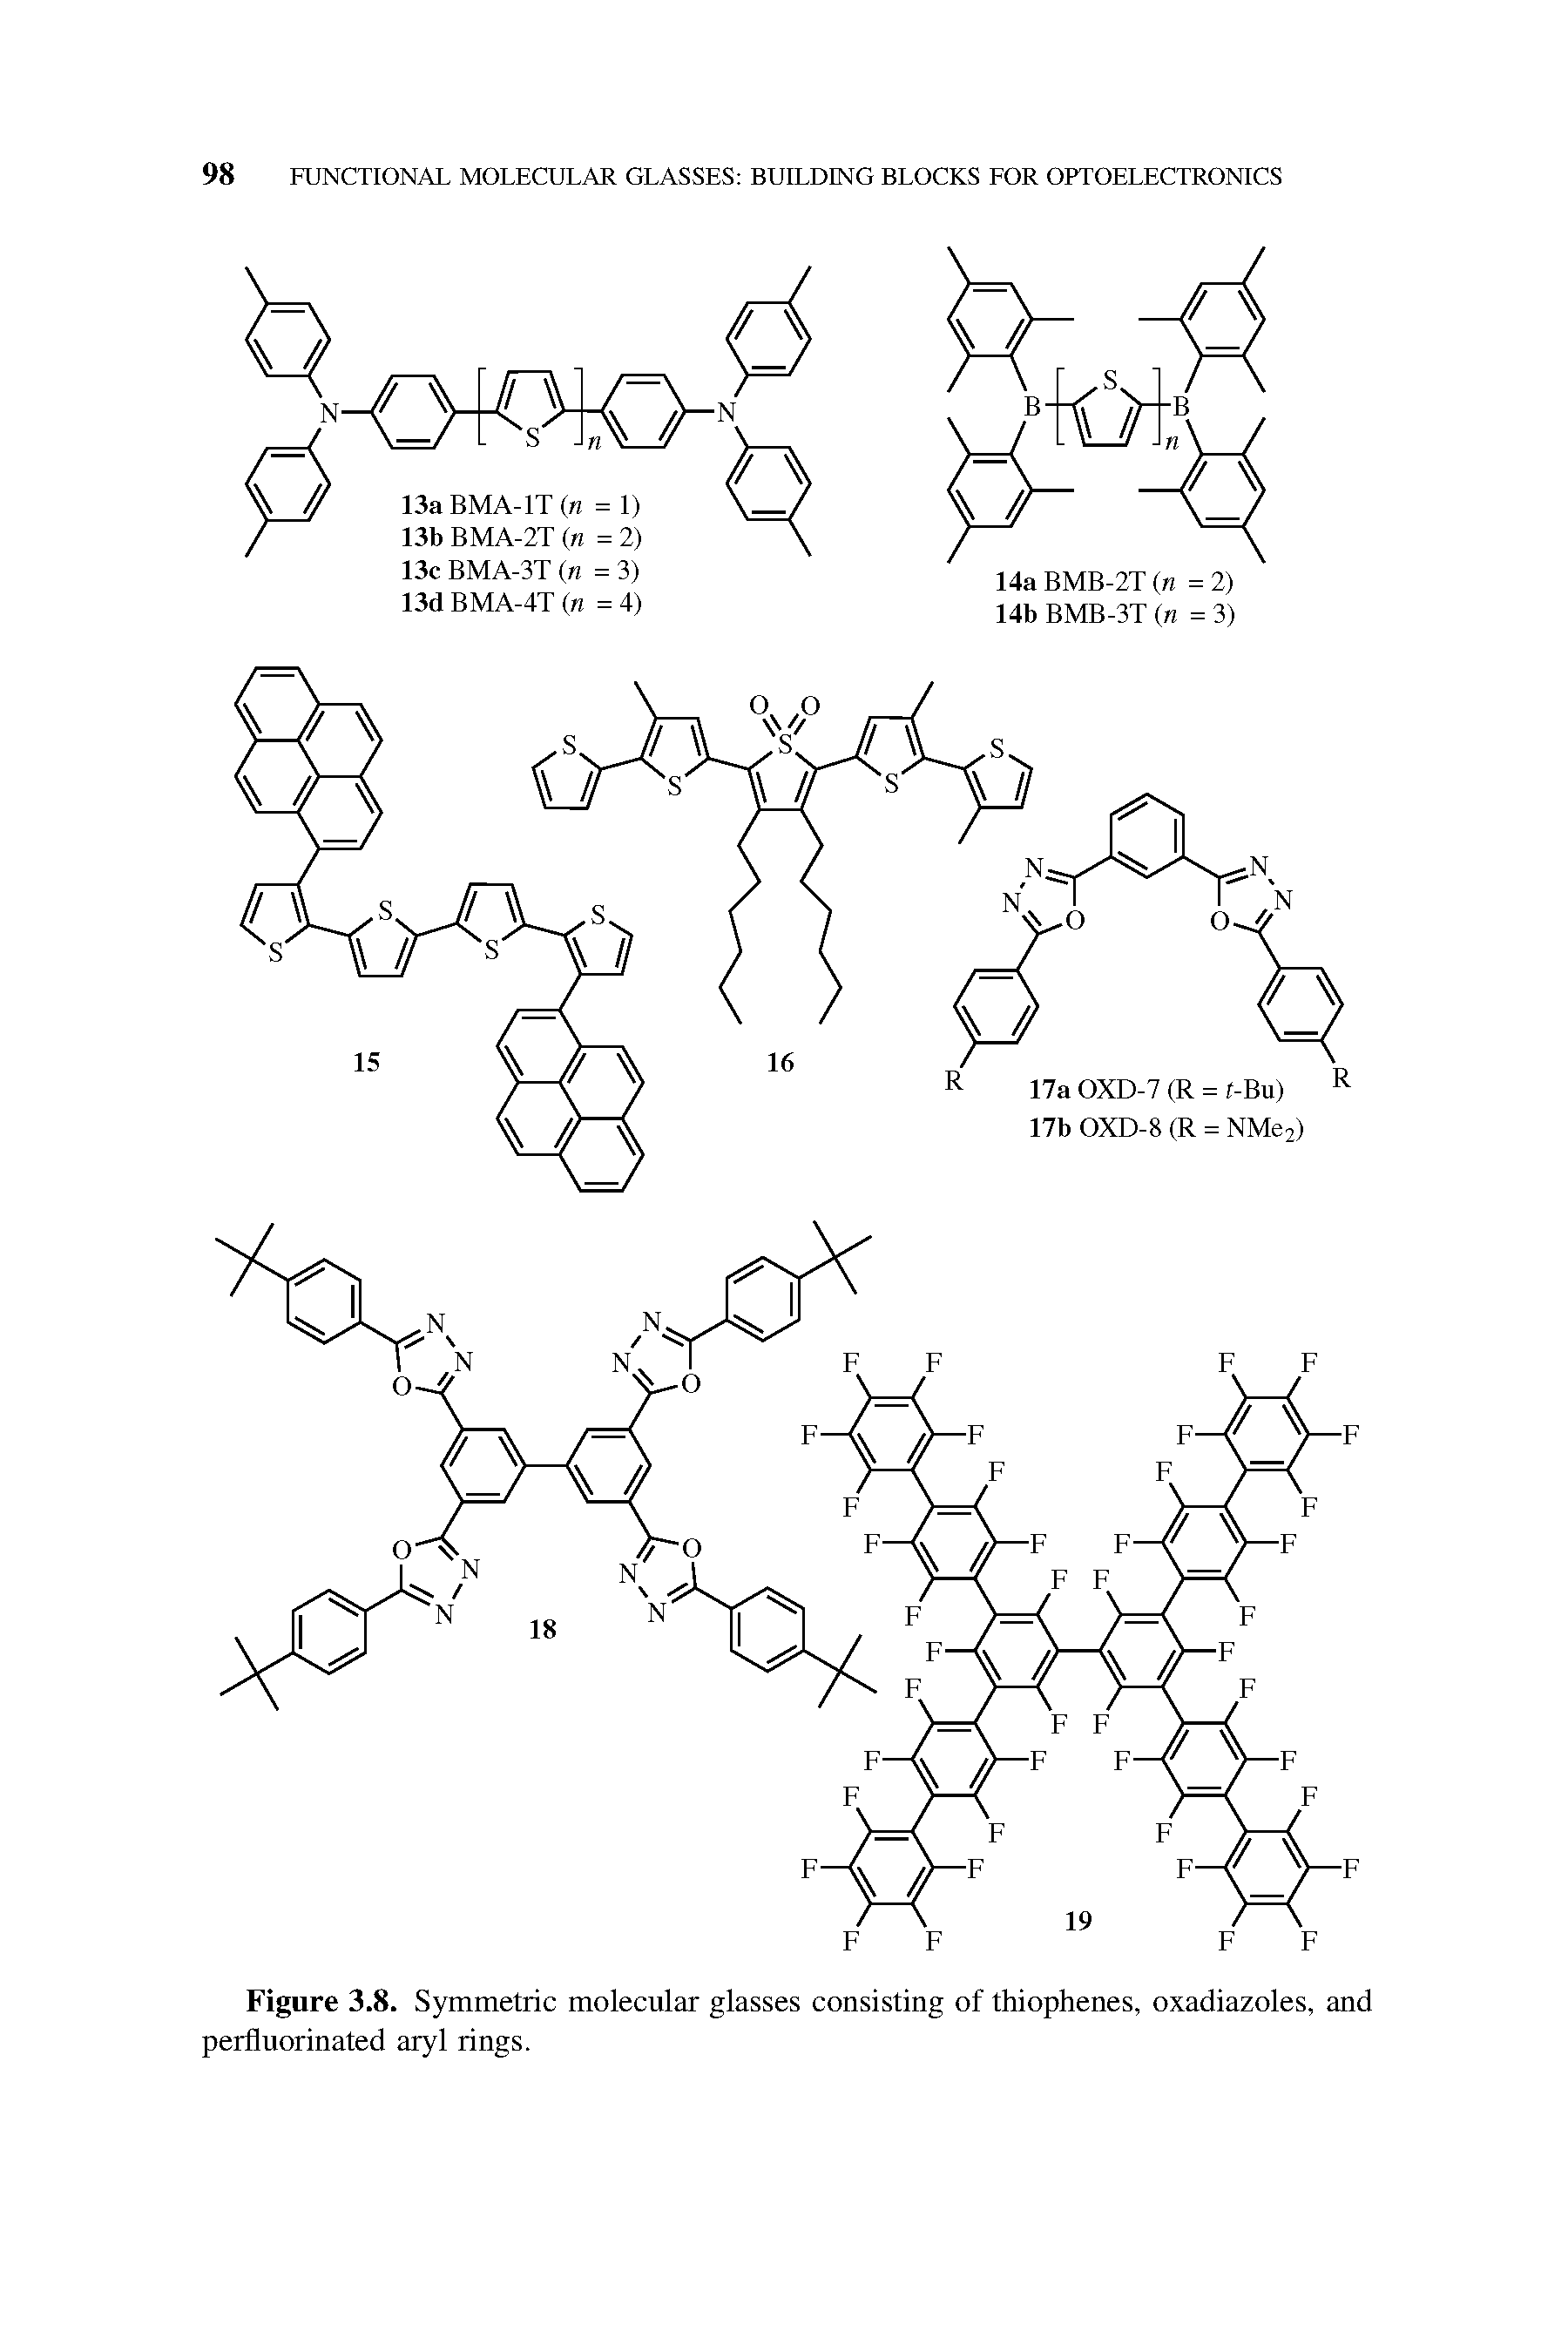 Figure 3.8. Symmetric molecular glasses consisting of thiophenes, oxadiazoles, and perfluorinated aryl rings.